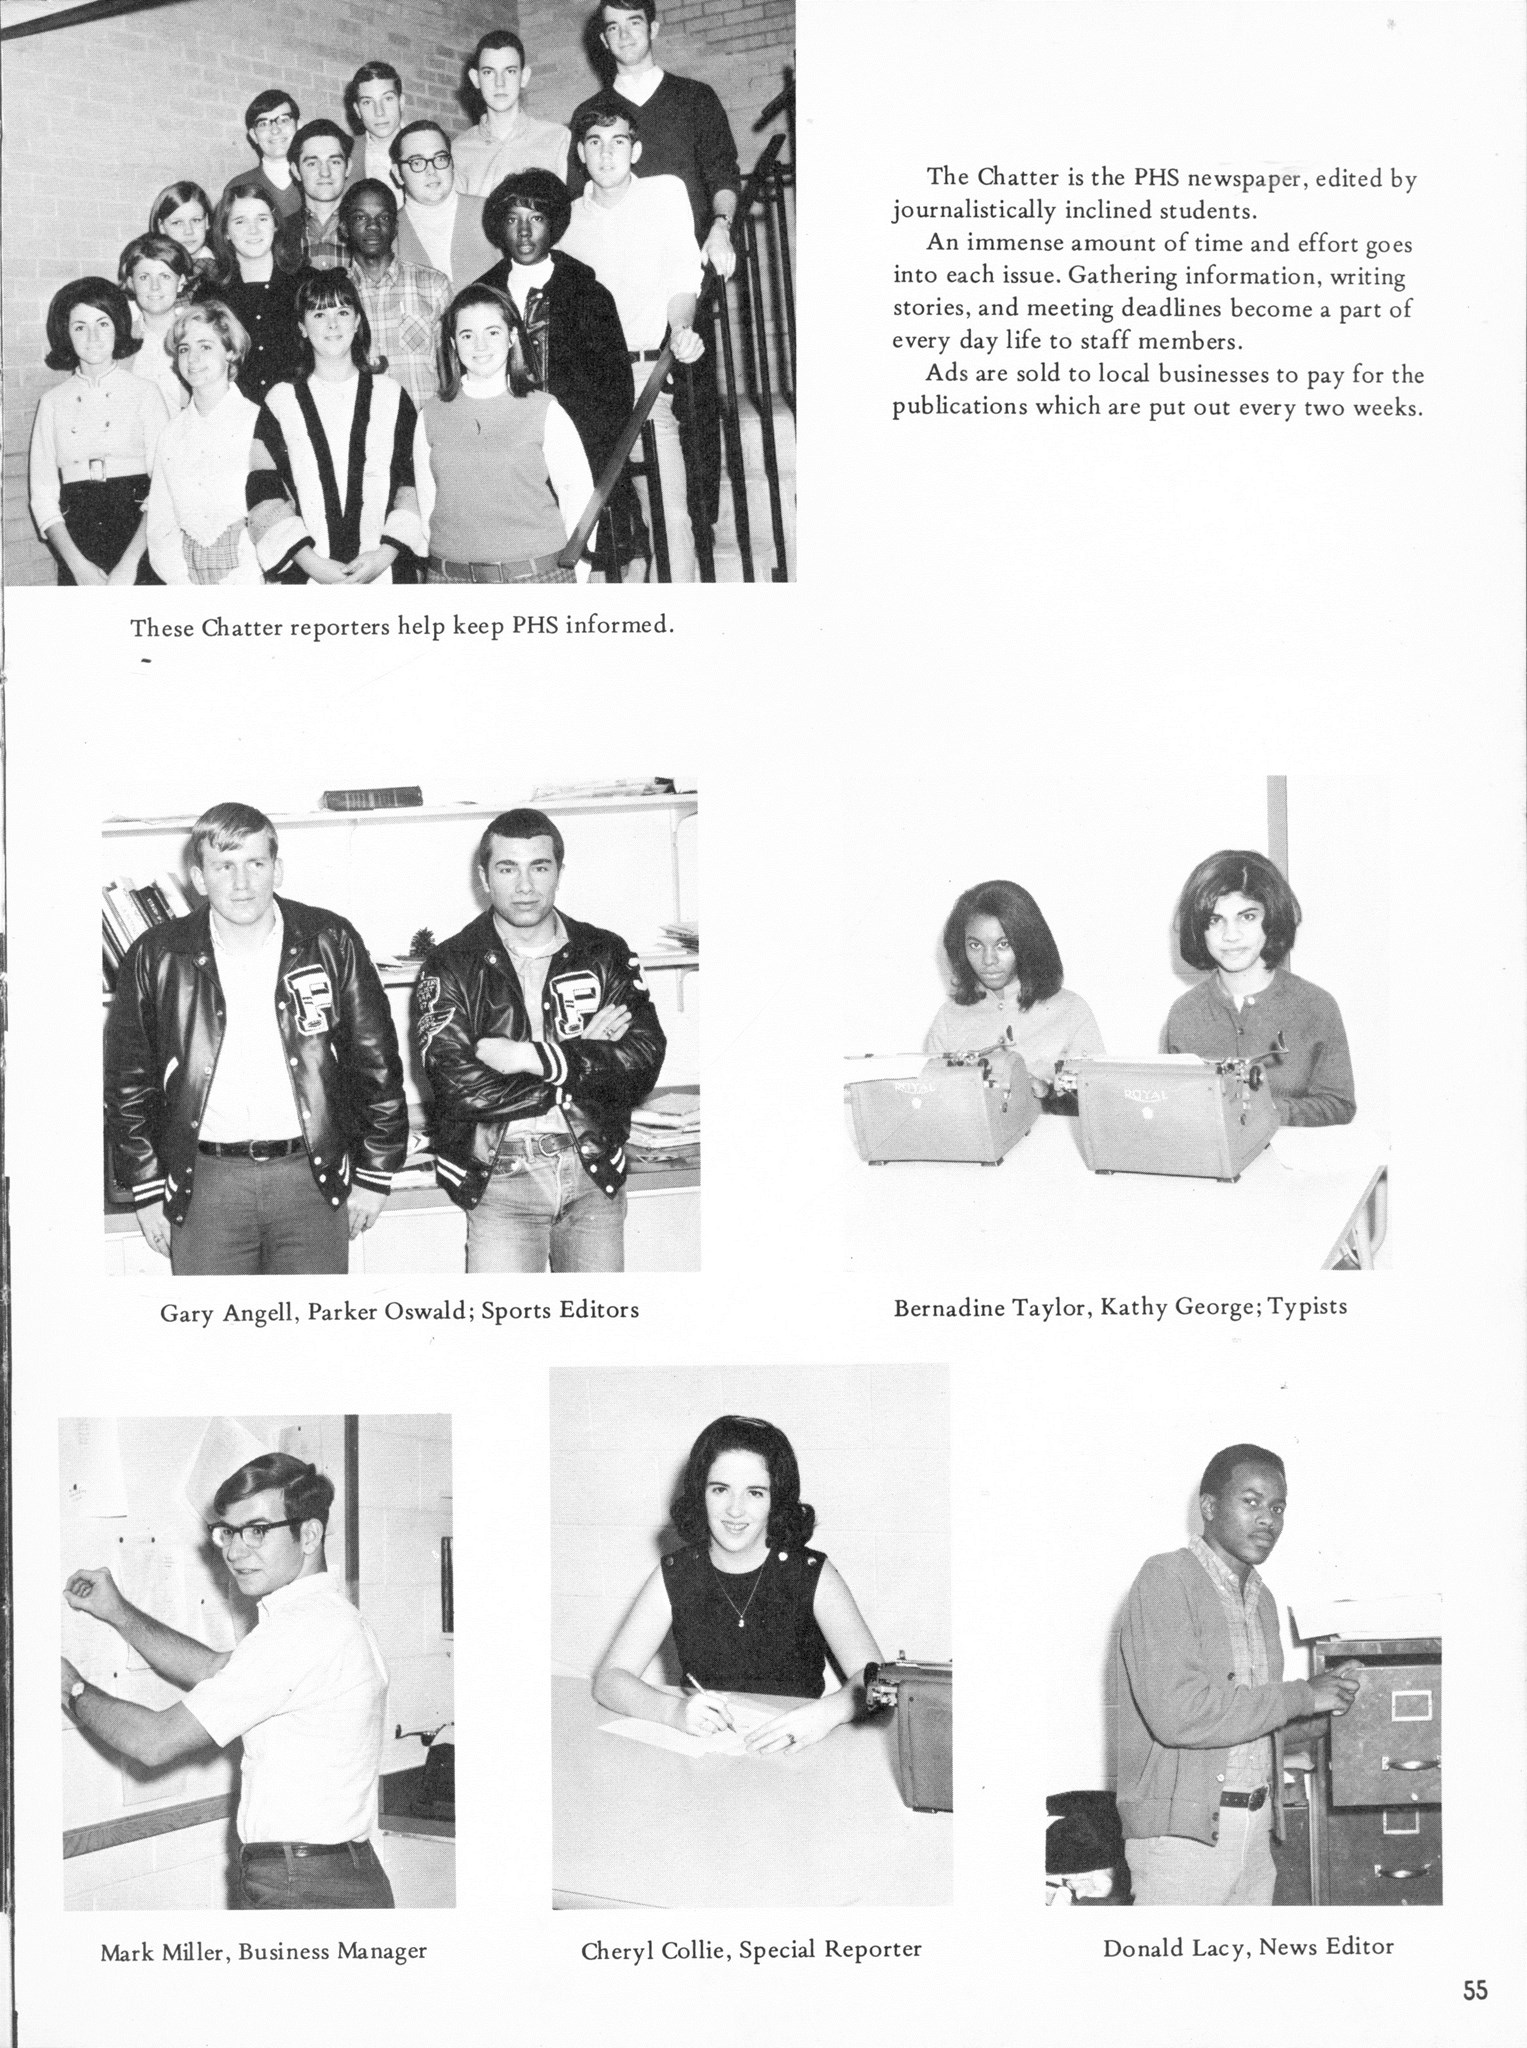 ../../../Images/Large/1969/Arclight-1969-pg0055.jpg